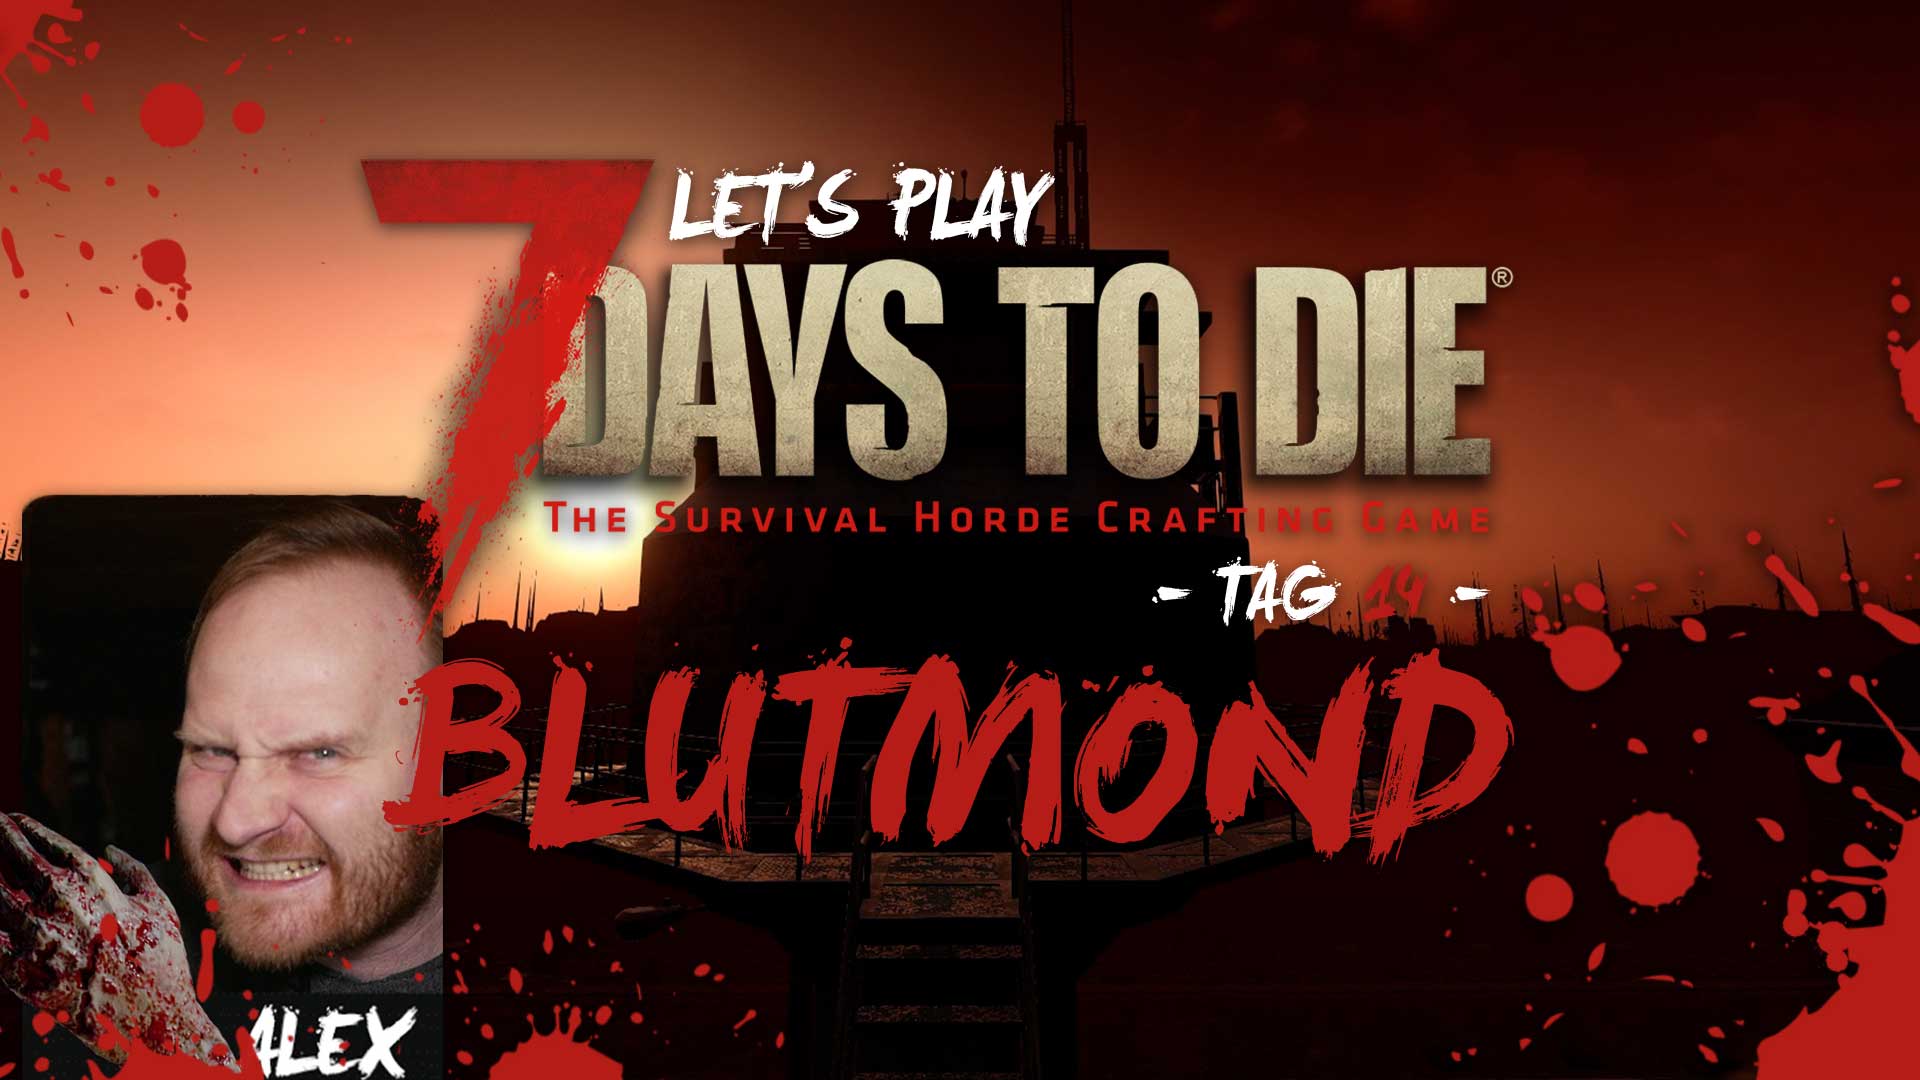 lets play 7 days to die tag 14 GG